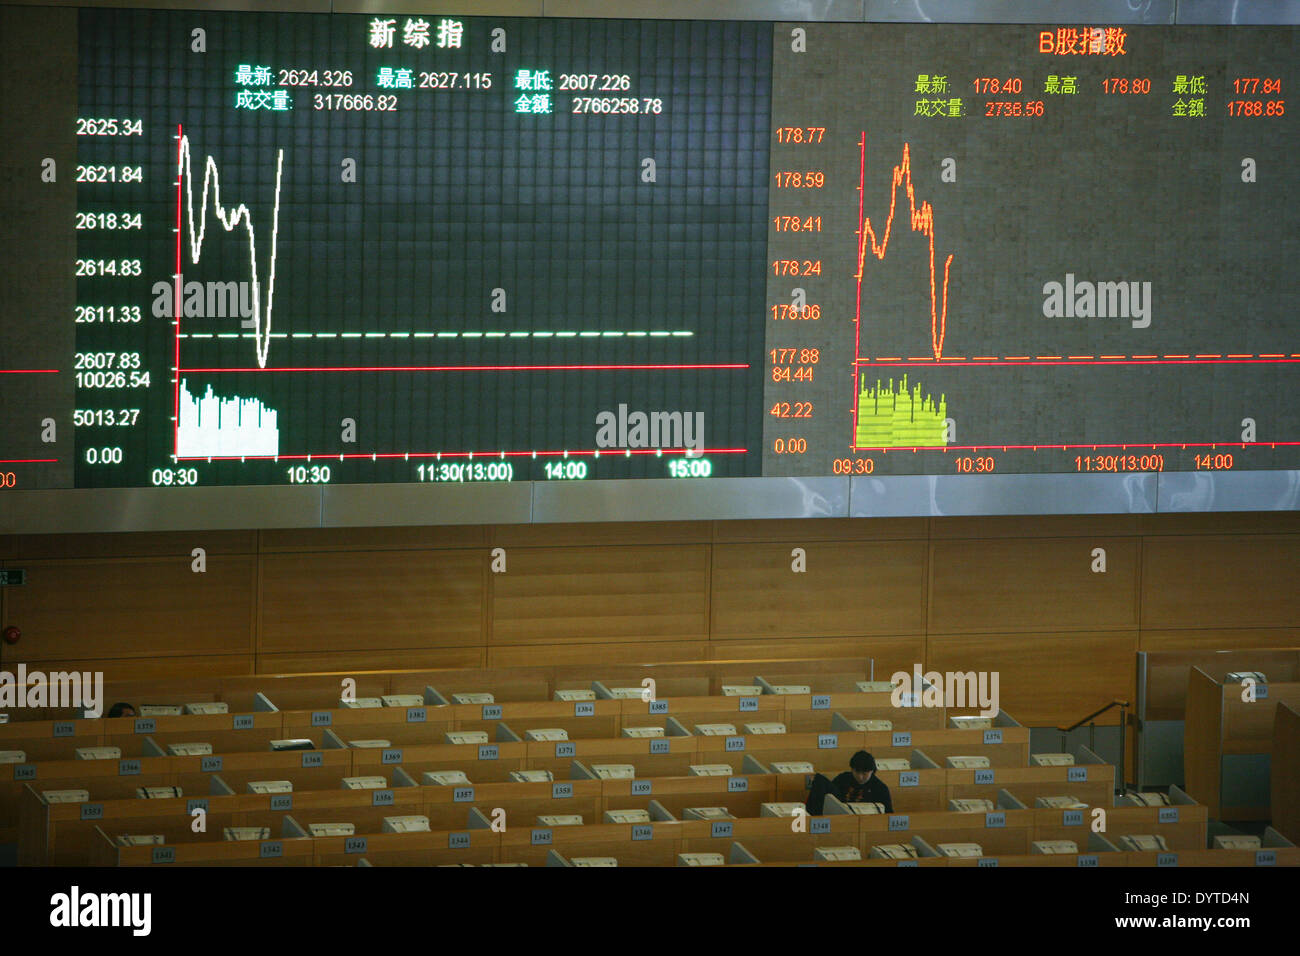 Employees work on the trading floor of the Shanghai Stock Exchange in Shanghai Stock Photo